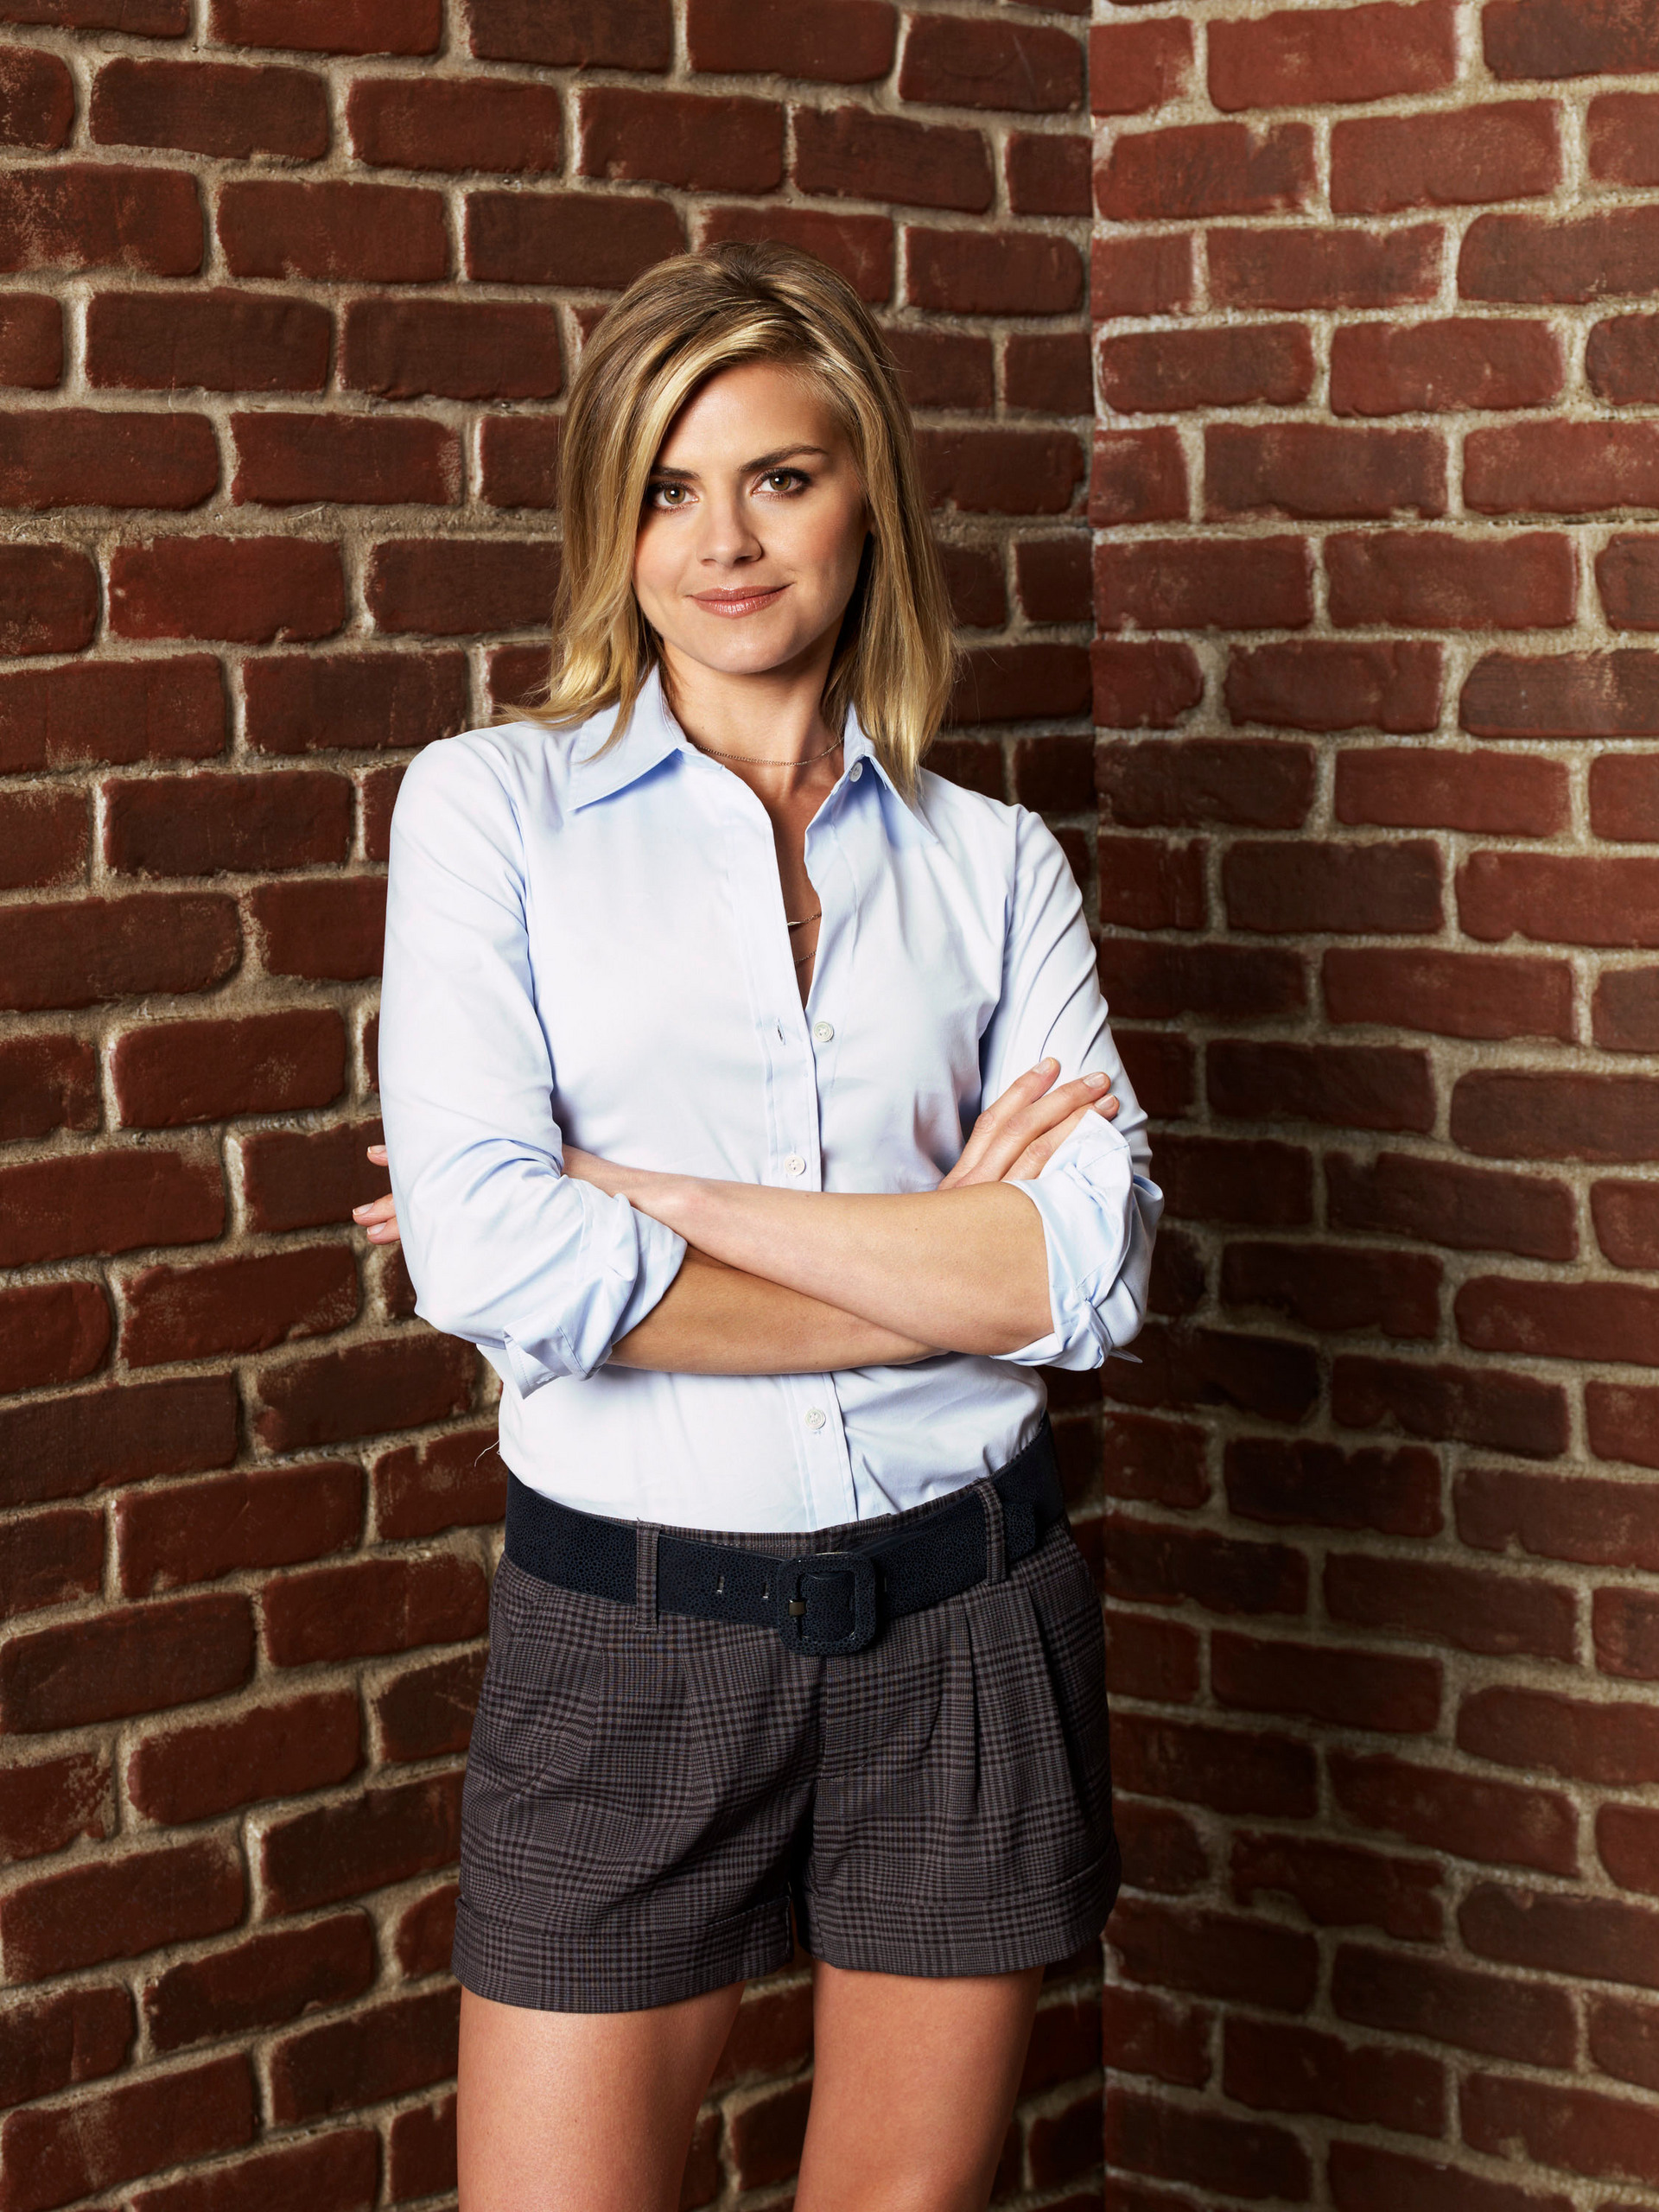 Eliza Coupe Wallpapers